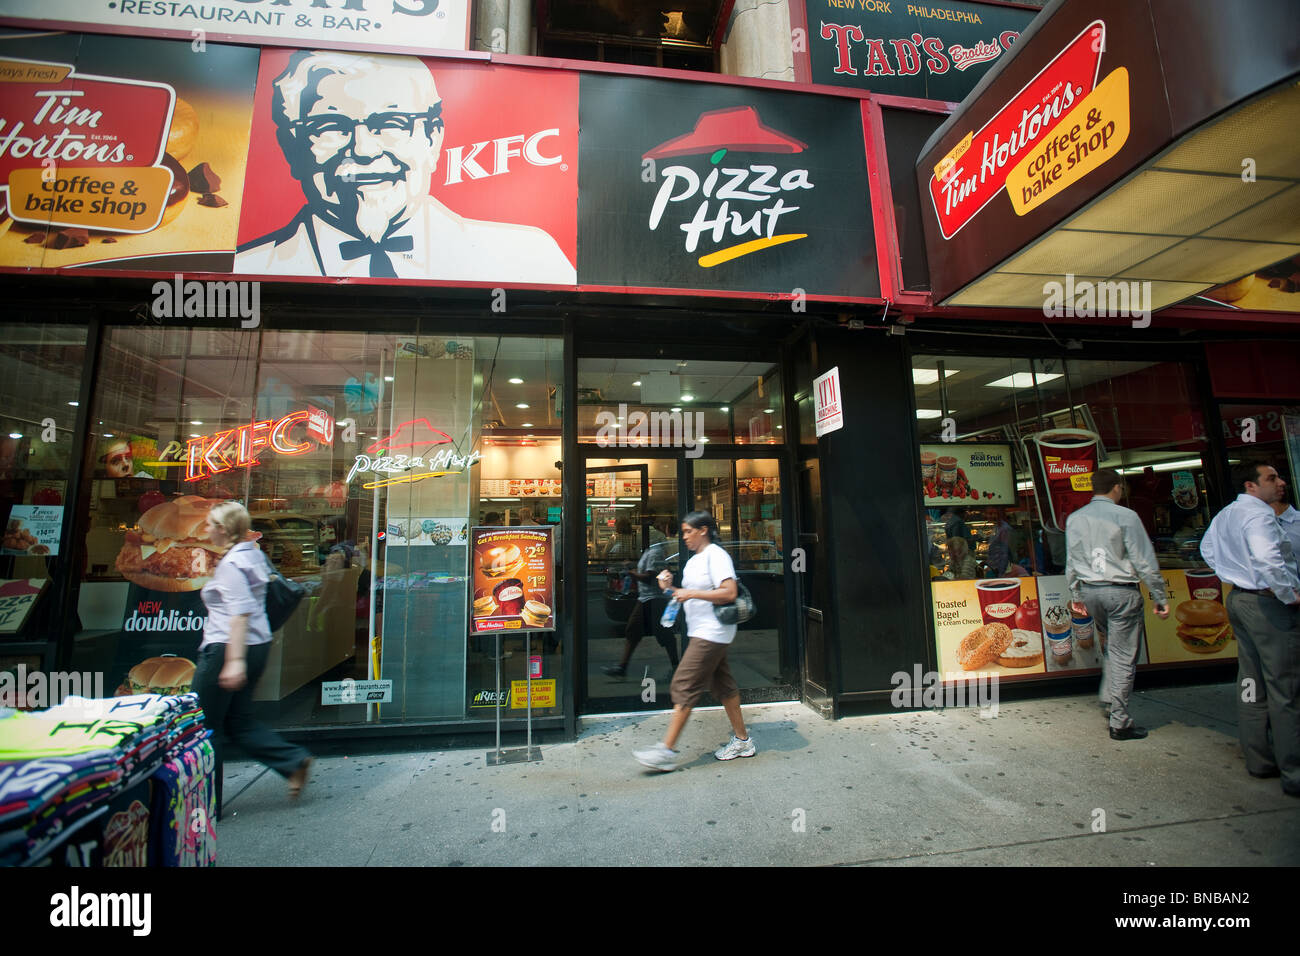 Signs for an assortment of fast food franchises located in one storefront in New York Stock Photo